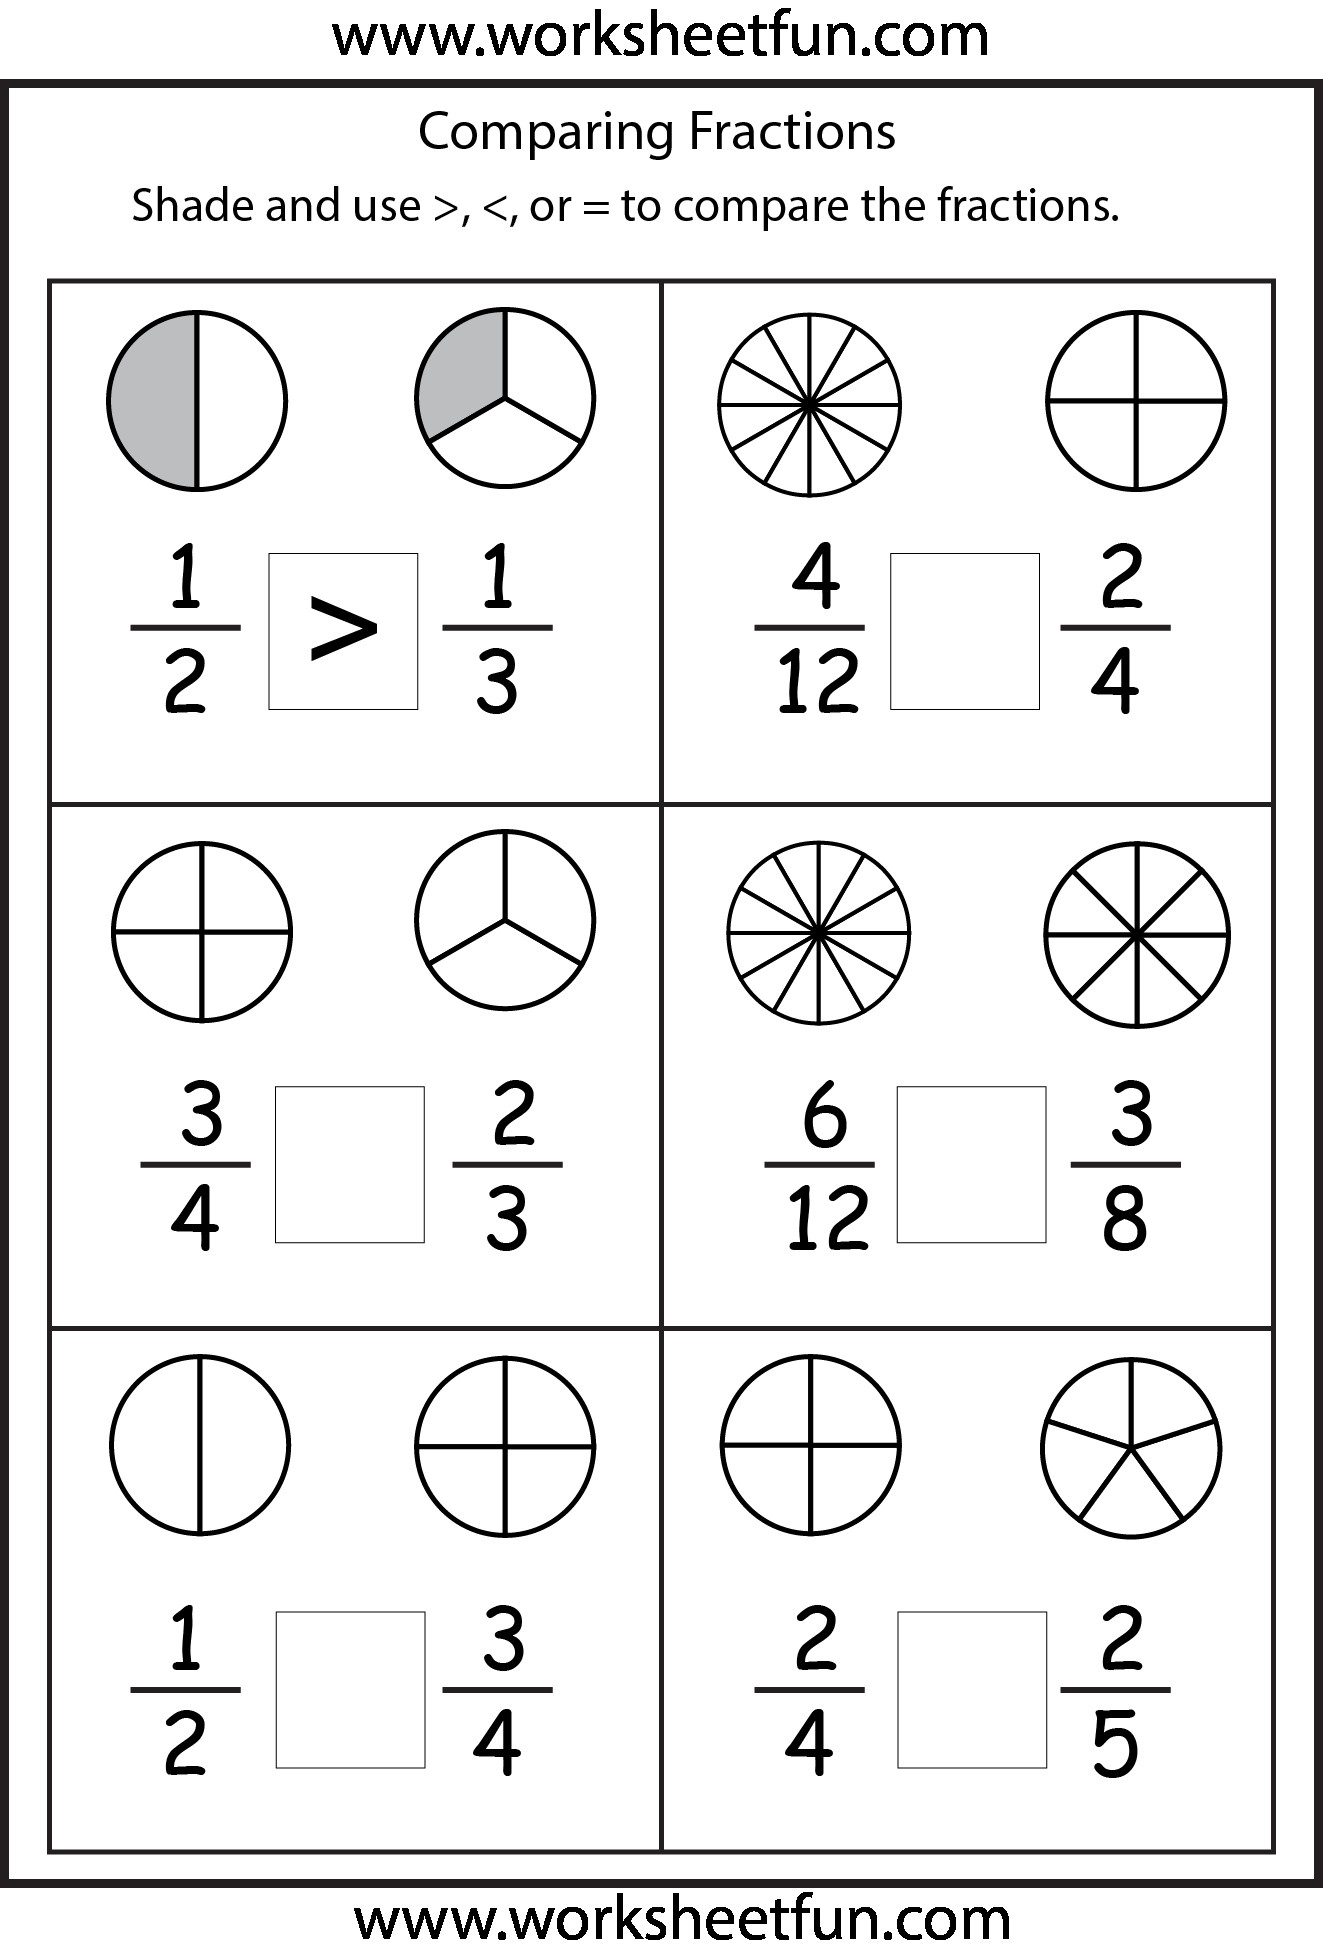 Free Math Worksheets Second Grade 2 Skip Counting Skip Counting by 4